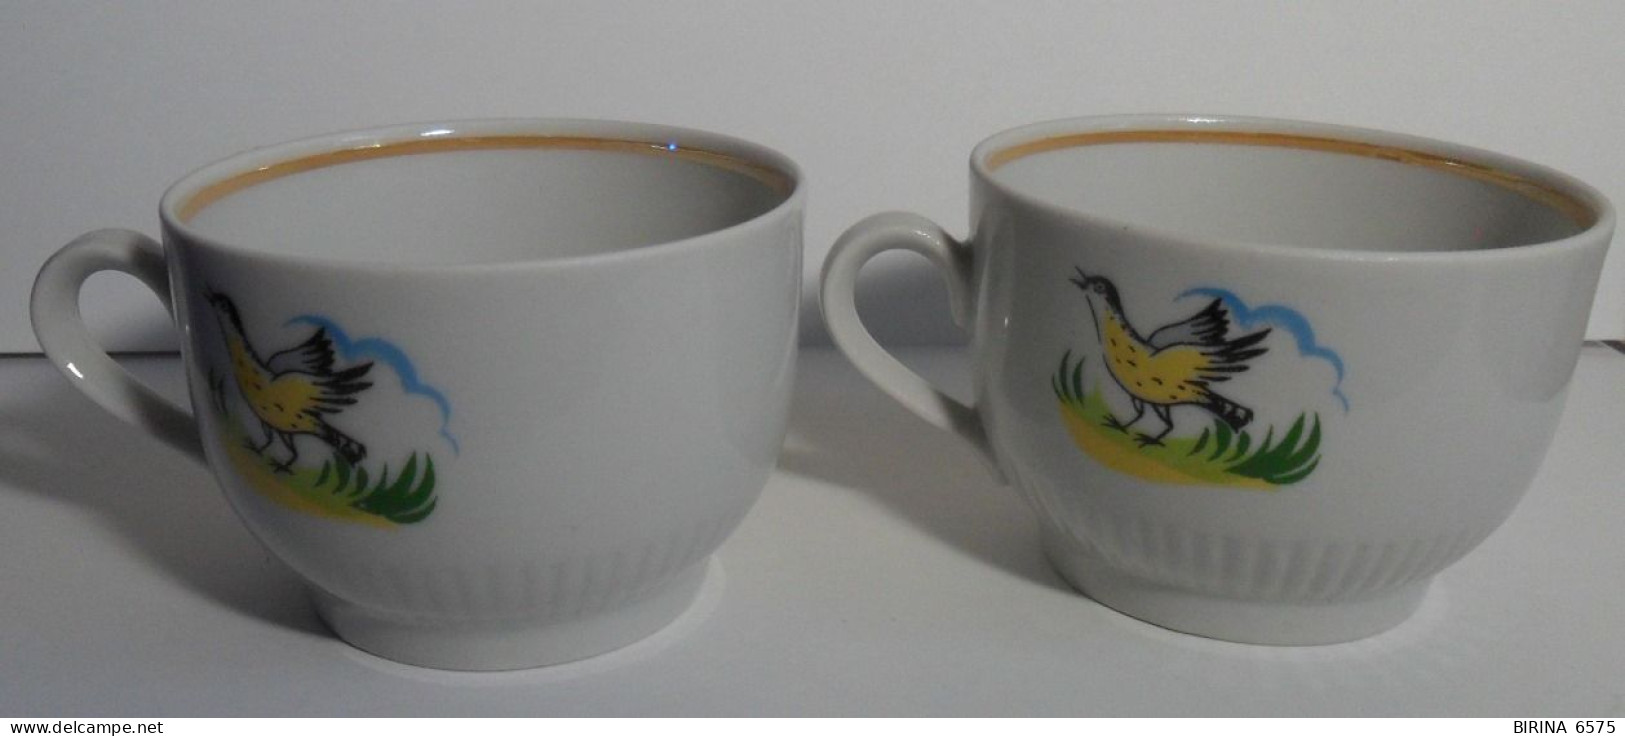 A Cup. The USSR. THE BRAND. PORCELAIN FACTORY PROLETARIAN. Lodge. Birdie. ONE LOT. - 11-52-i - Cups